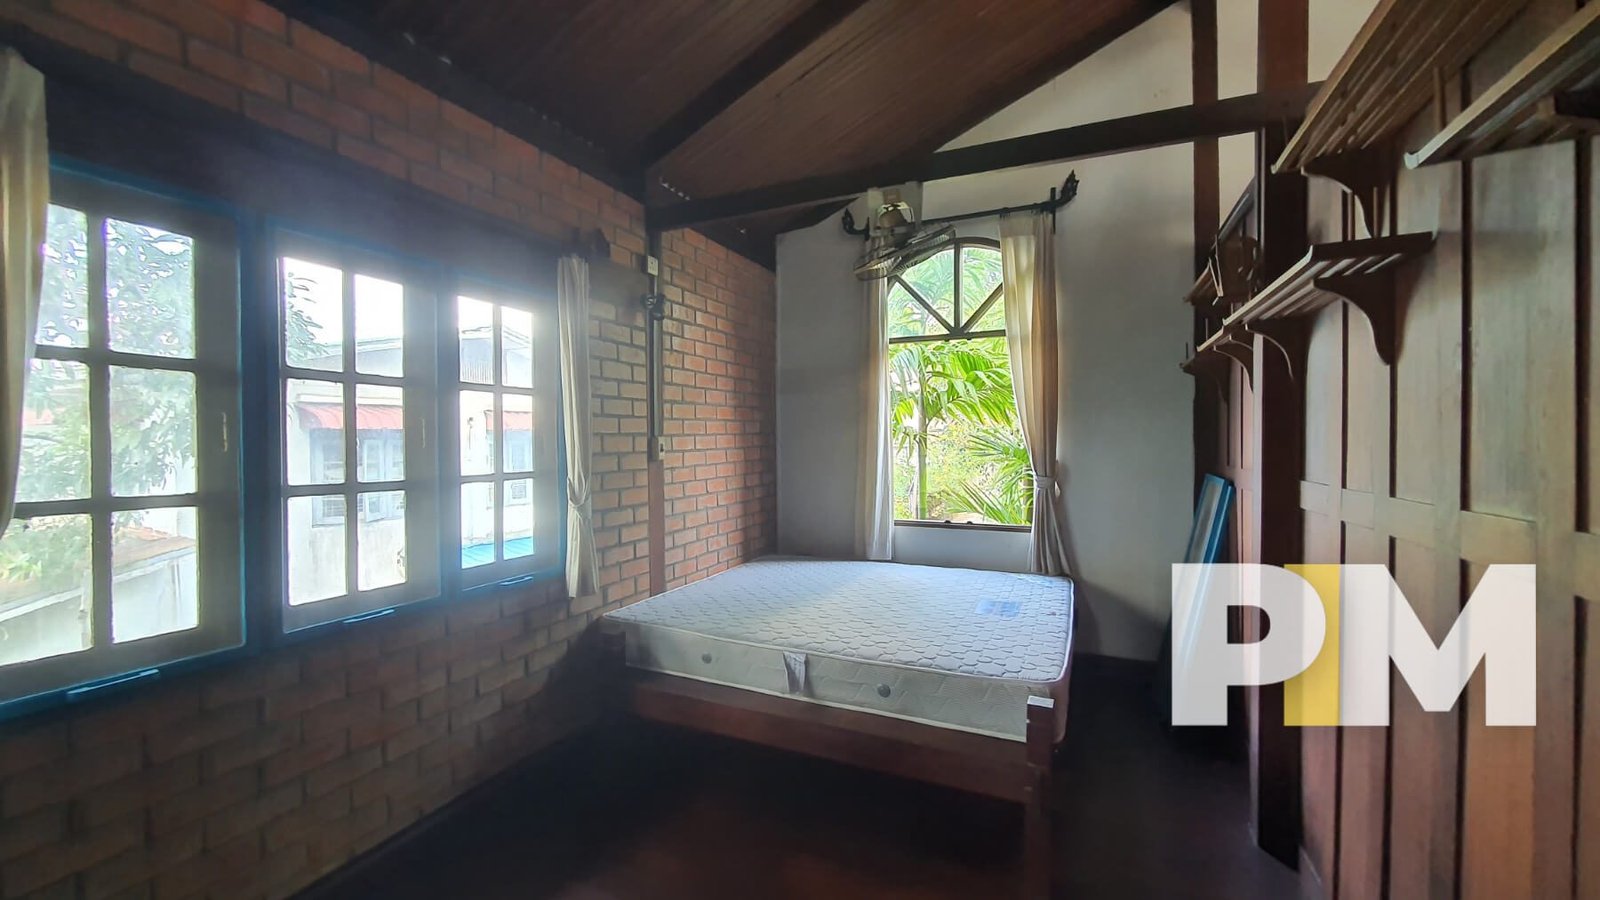 Room with windows - Property in Yangon